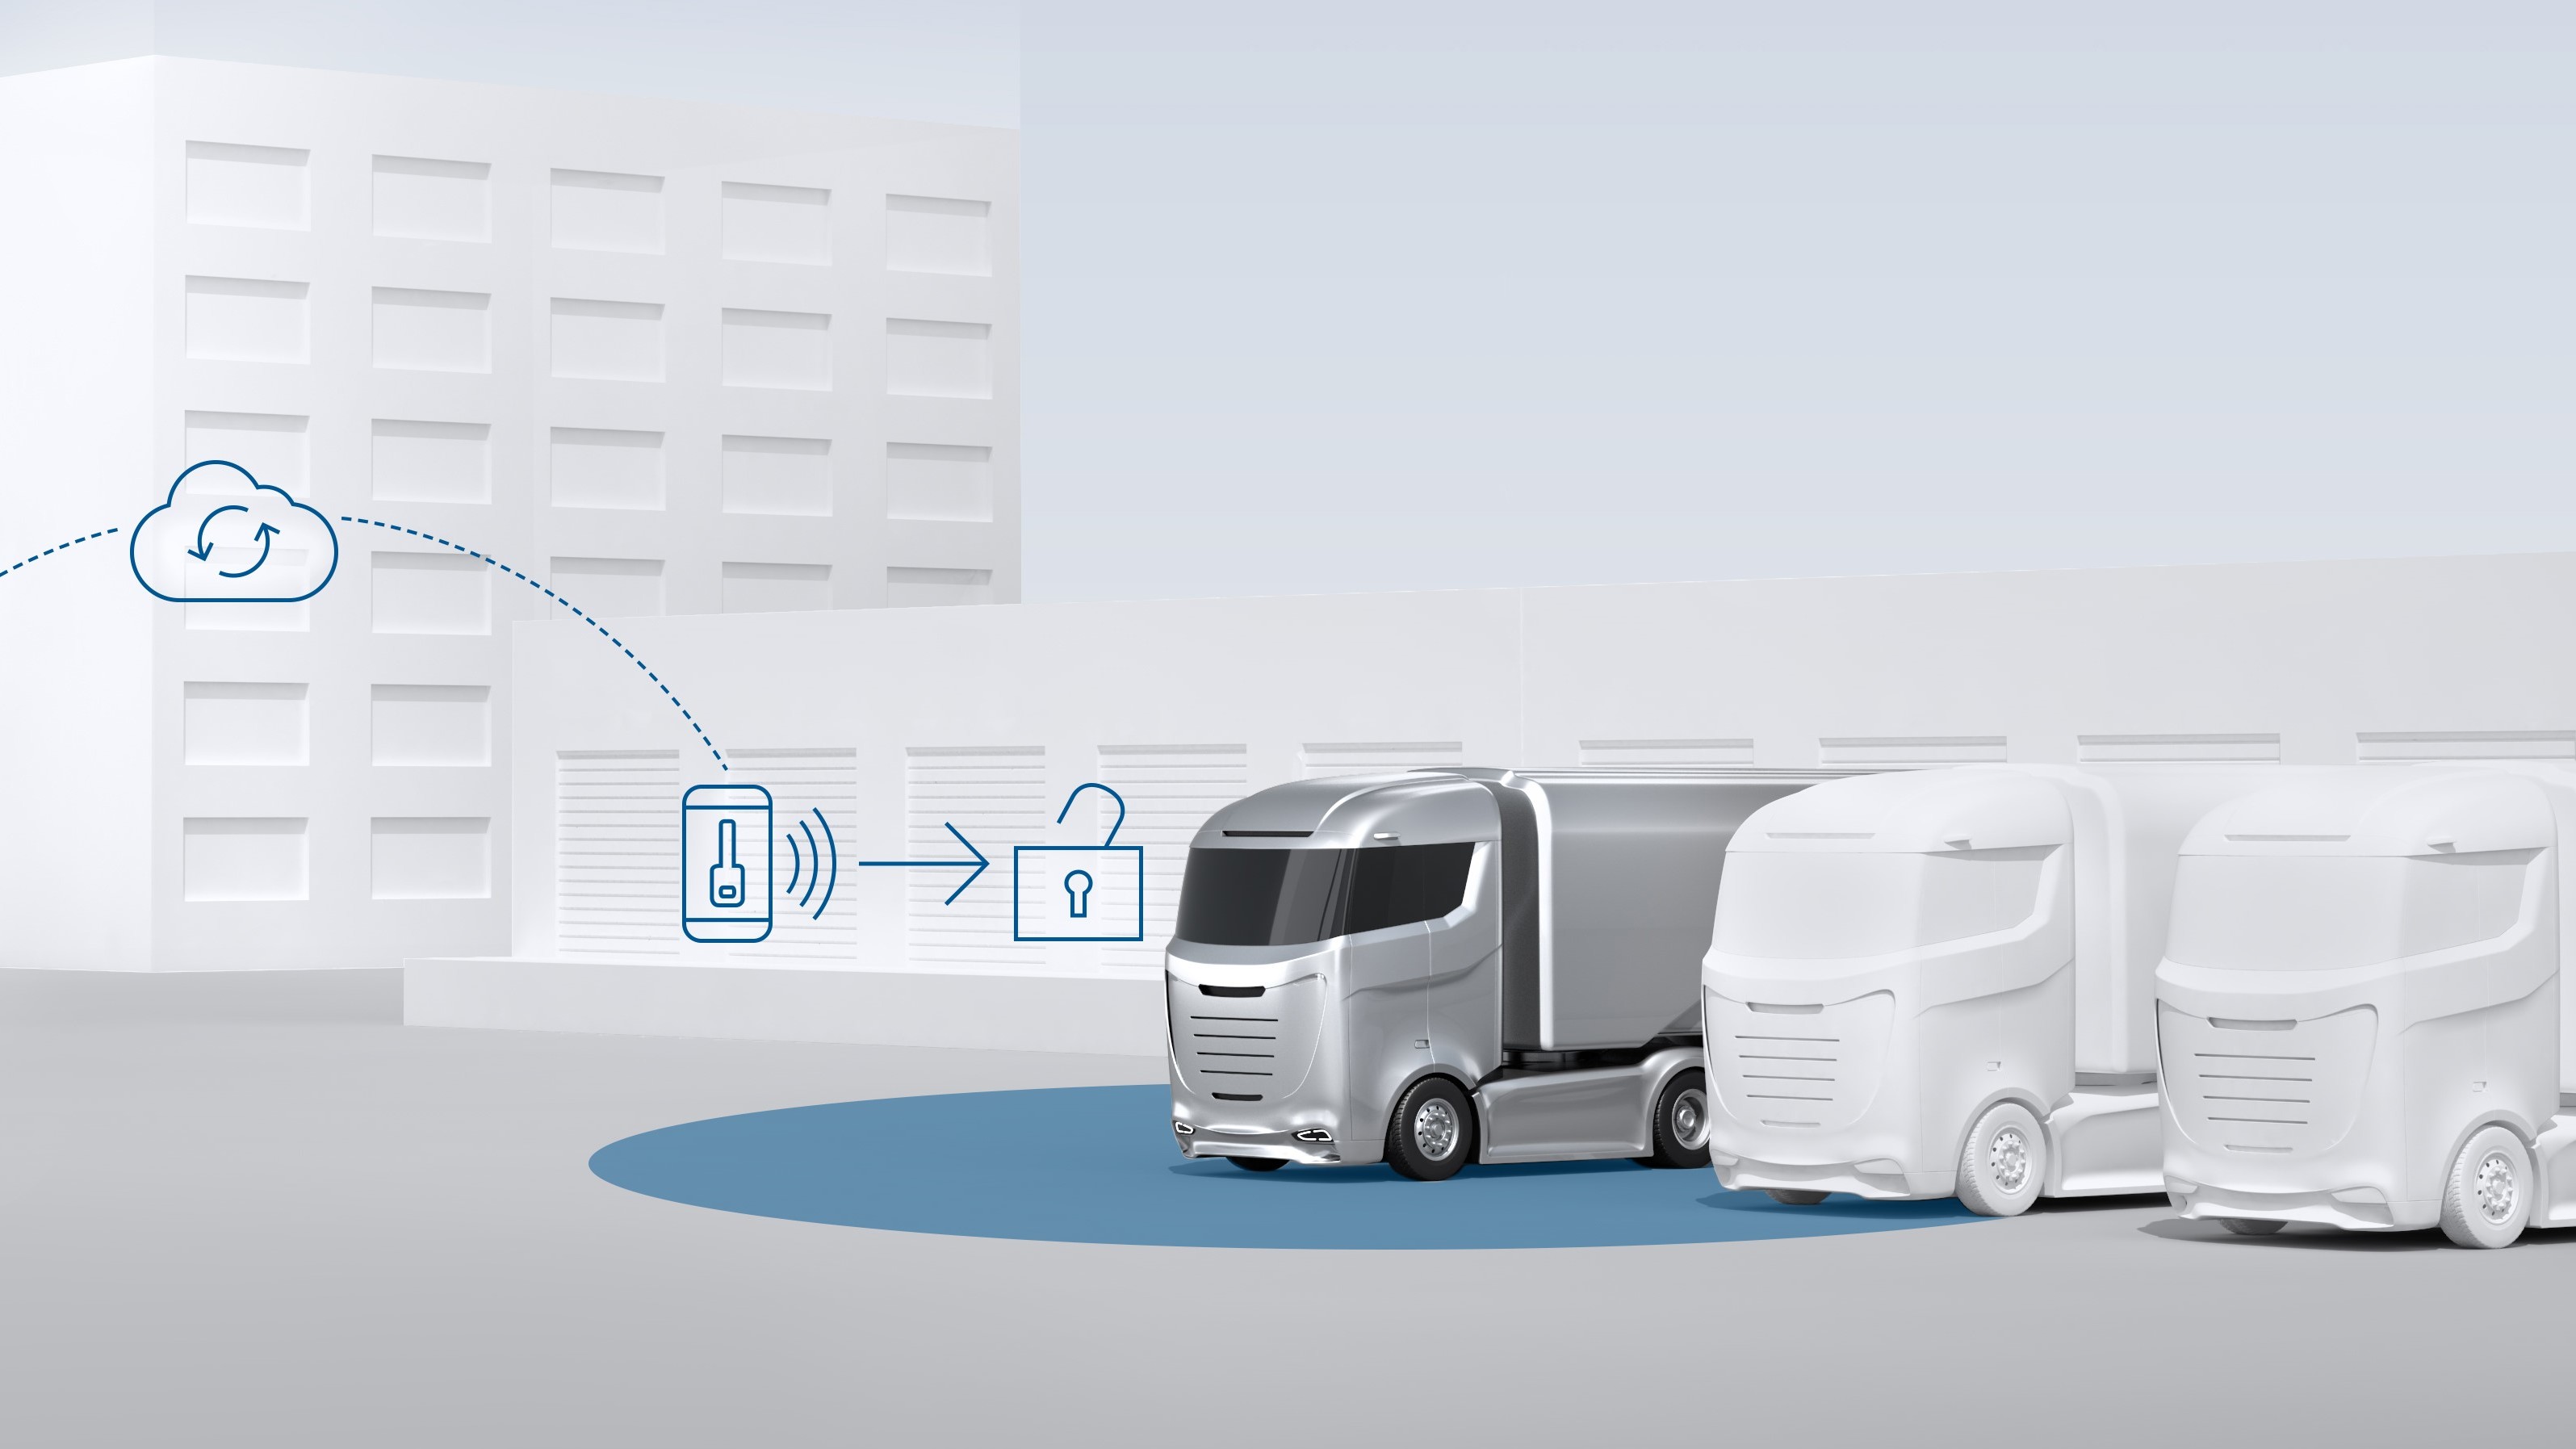 World first: the first keyless access system for trucks